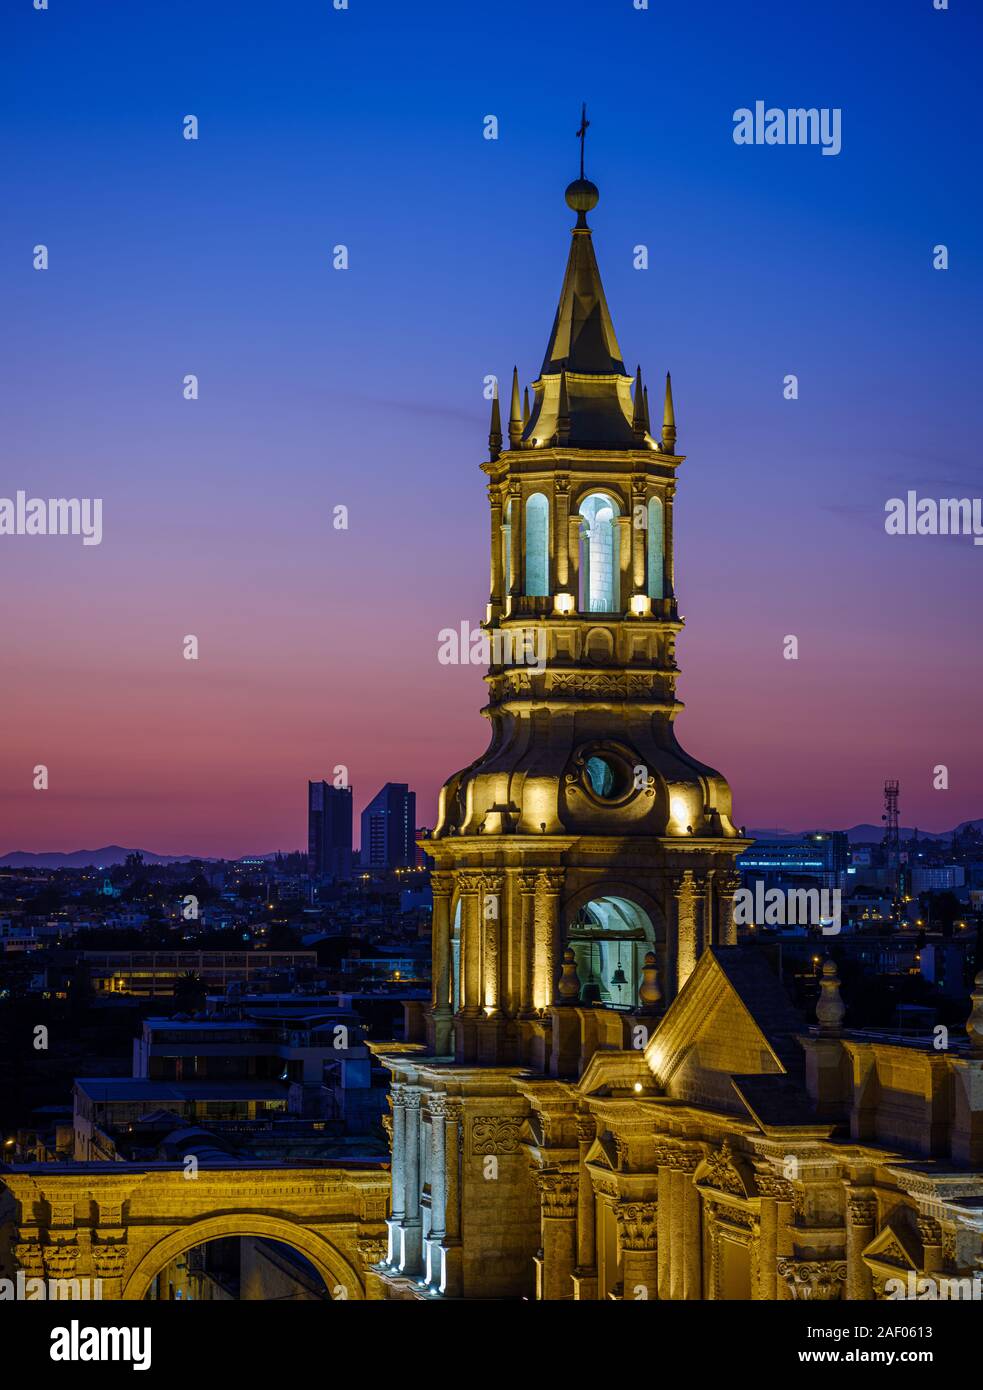 AREQUIPA, PERU - CIRCA SEPTEMBER 2019:  The Basilica Cathedral of Arequipa at dusk. It is the most important Catholic church of the city. The cathedra Stock Photo